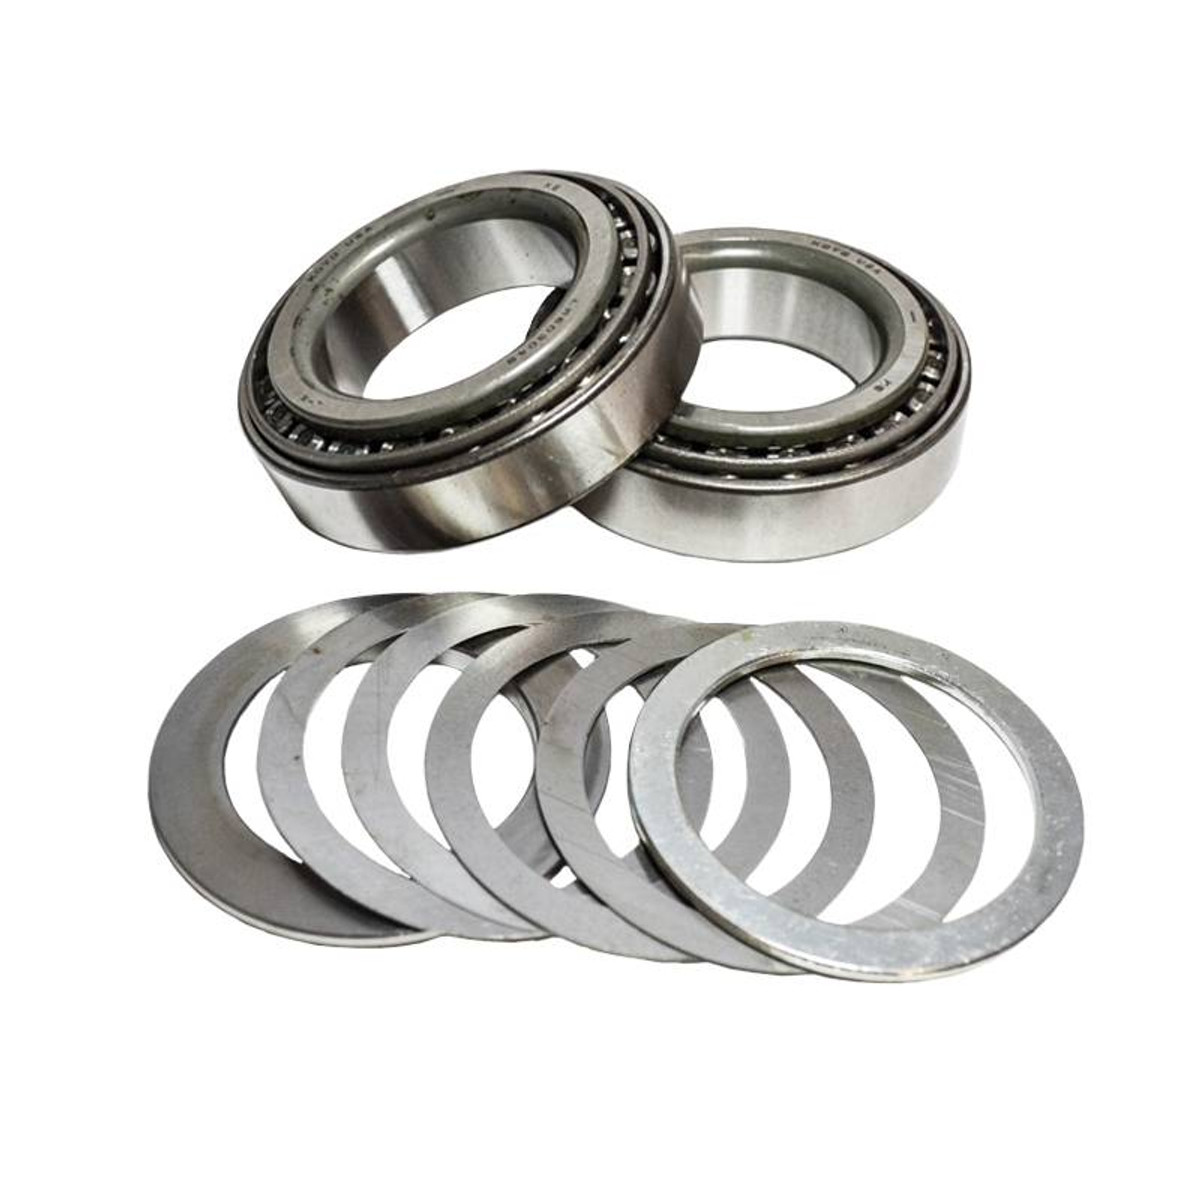 Ford 9.75 Inch Rear Carrier Bearing Kit CK-F9.75